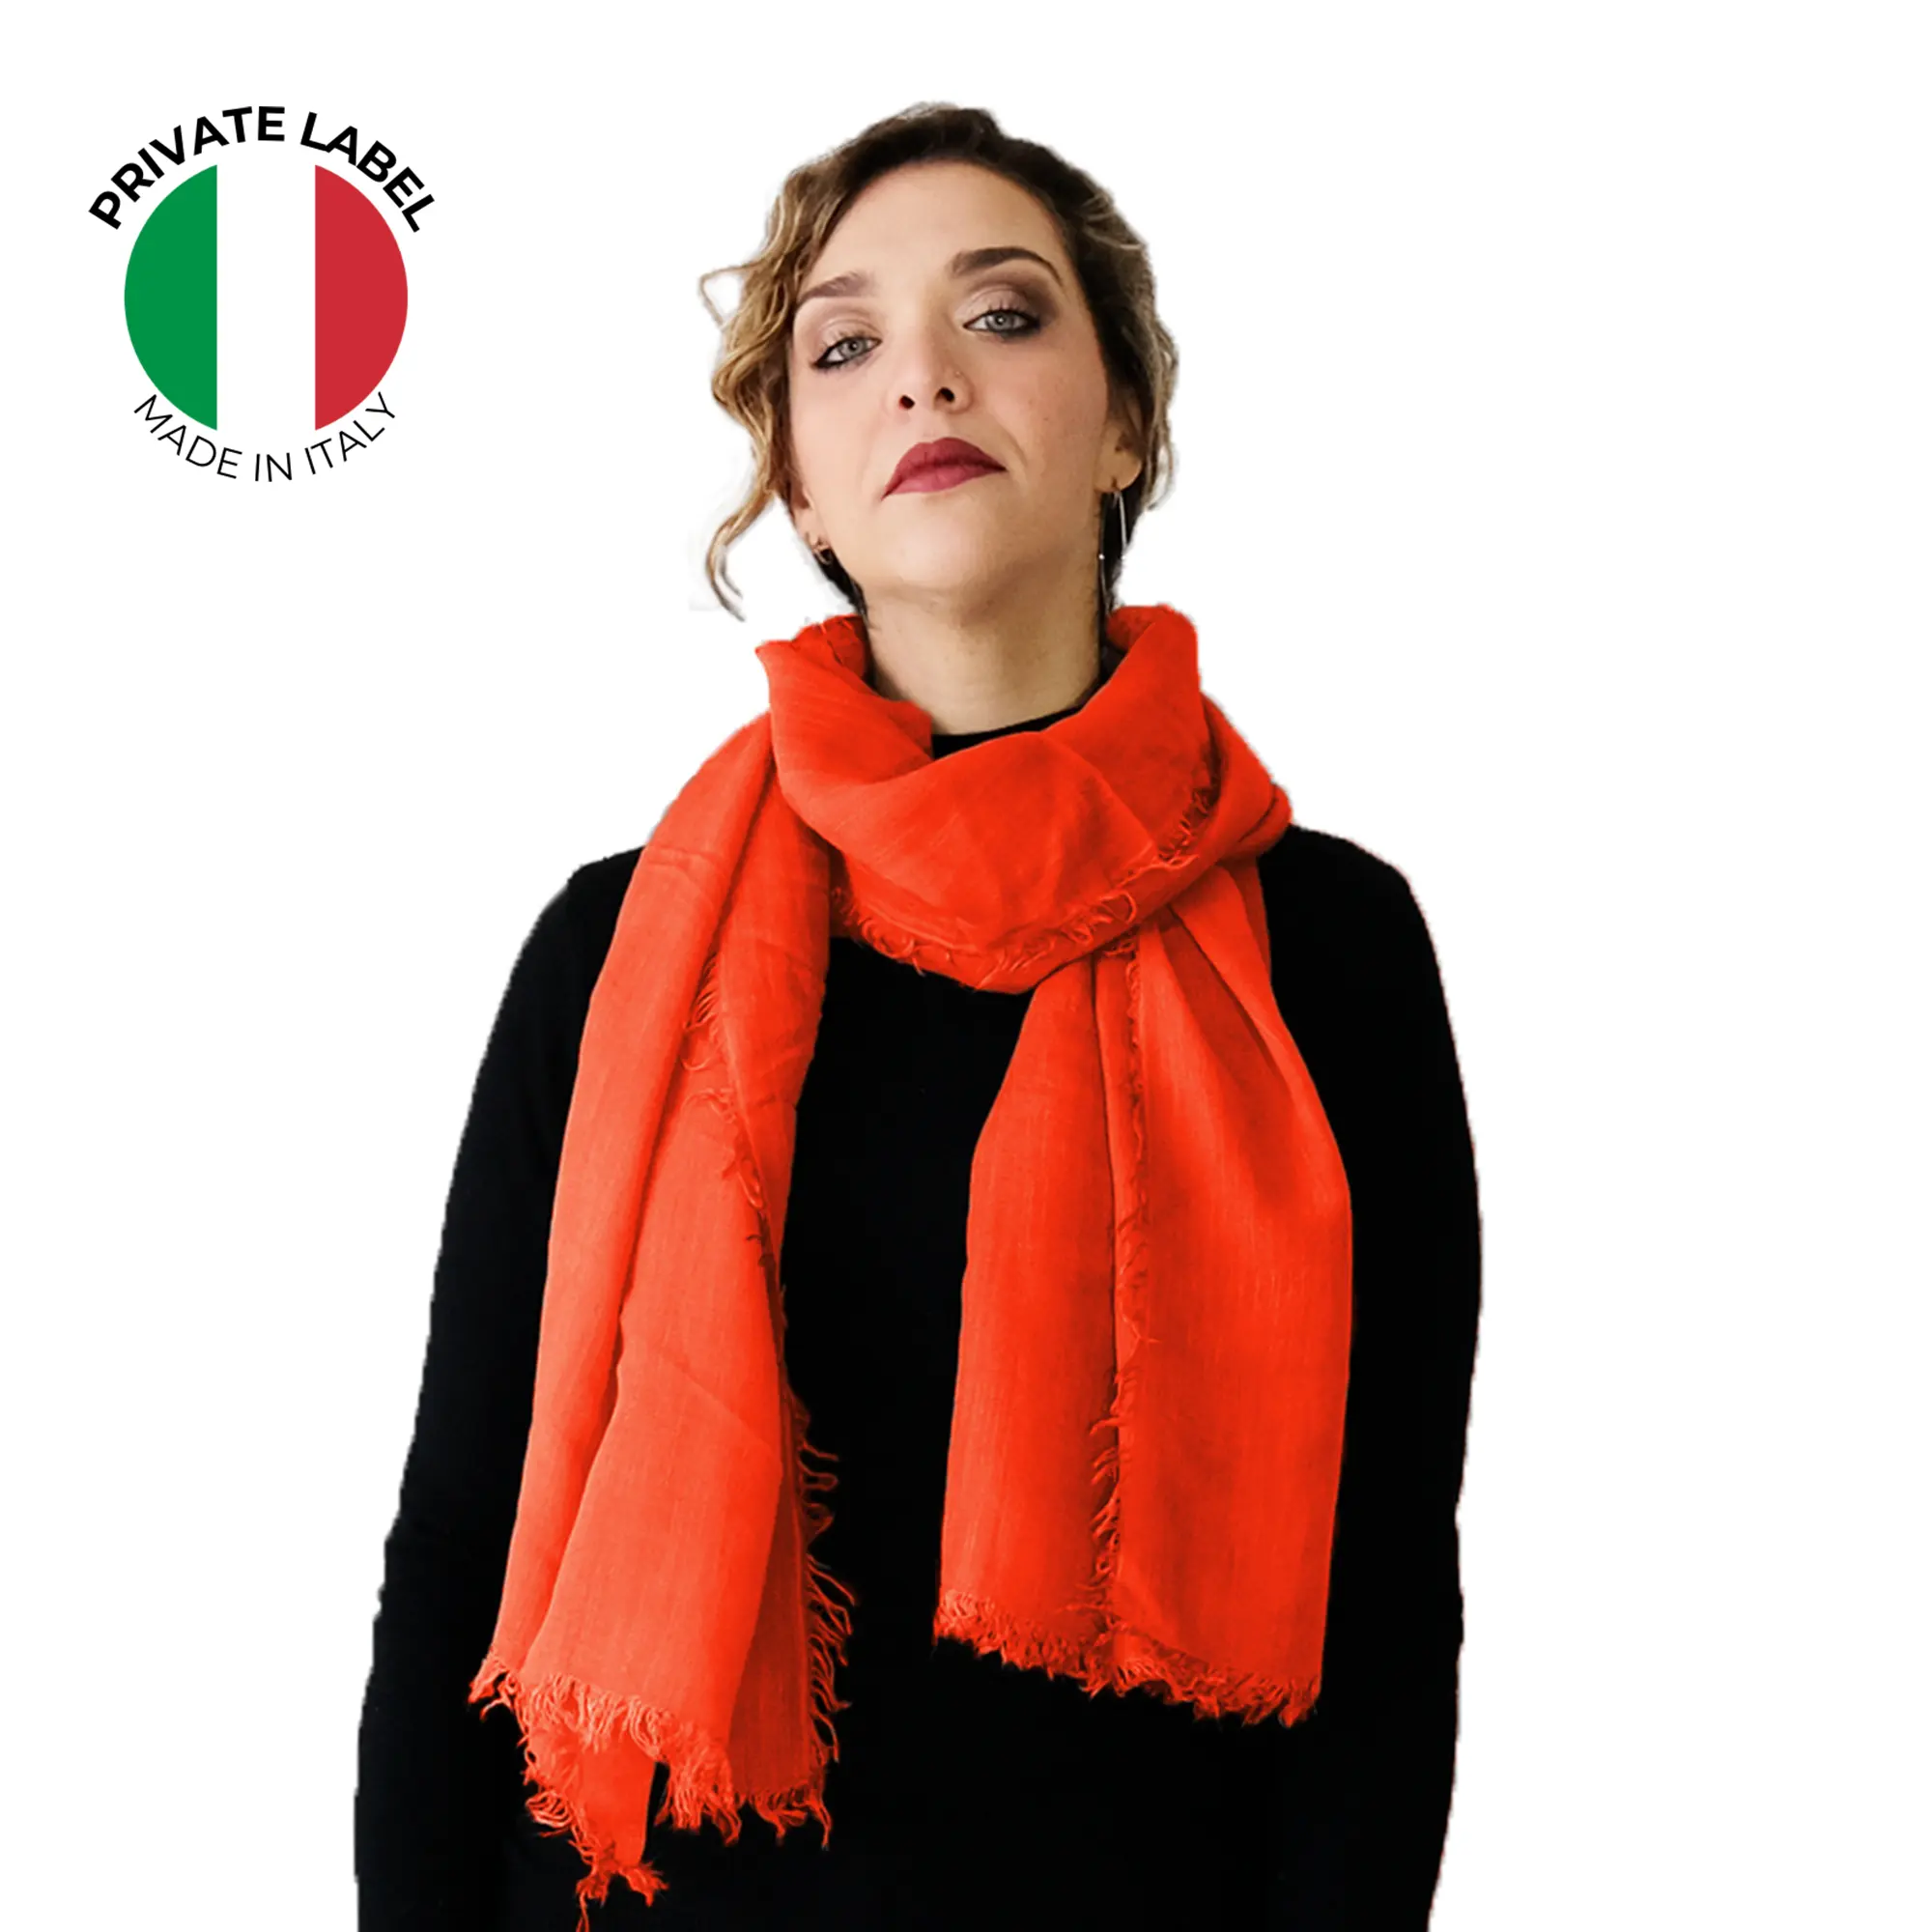 Private Label Scarf for Women 100% Bamboo Made in Italy High Quality Colourful Foulard for All Season Orange Scarves